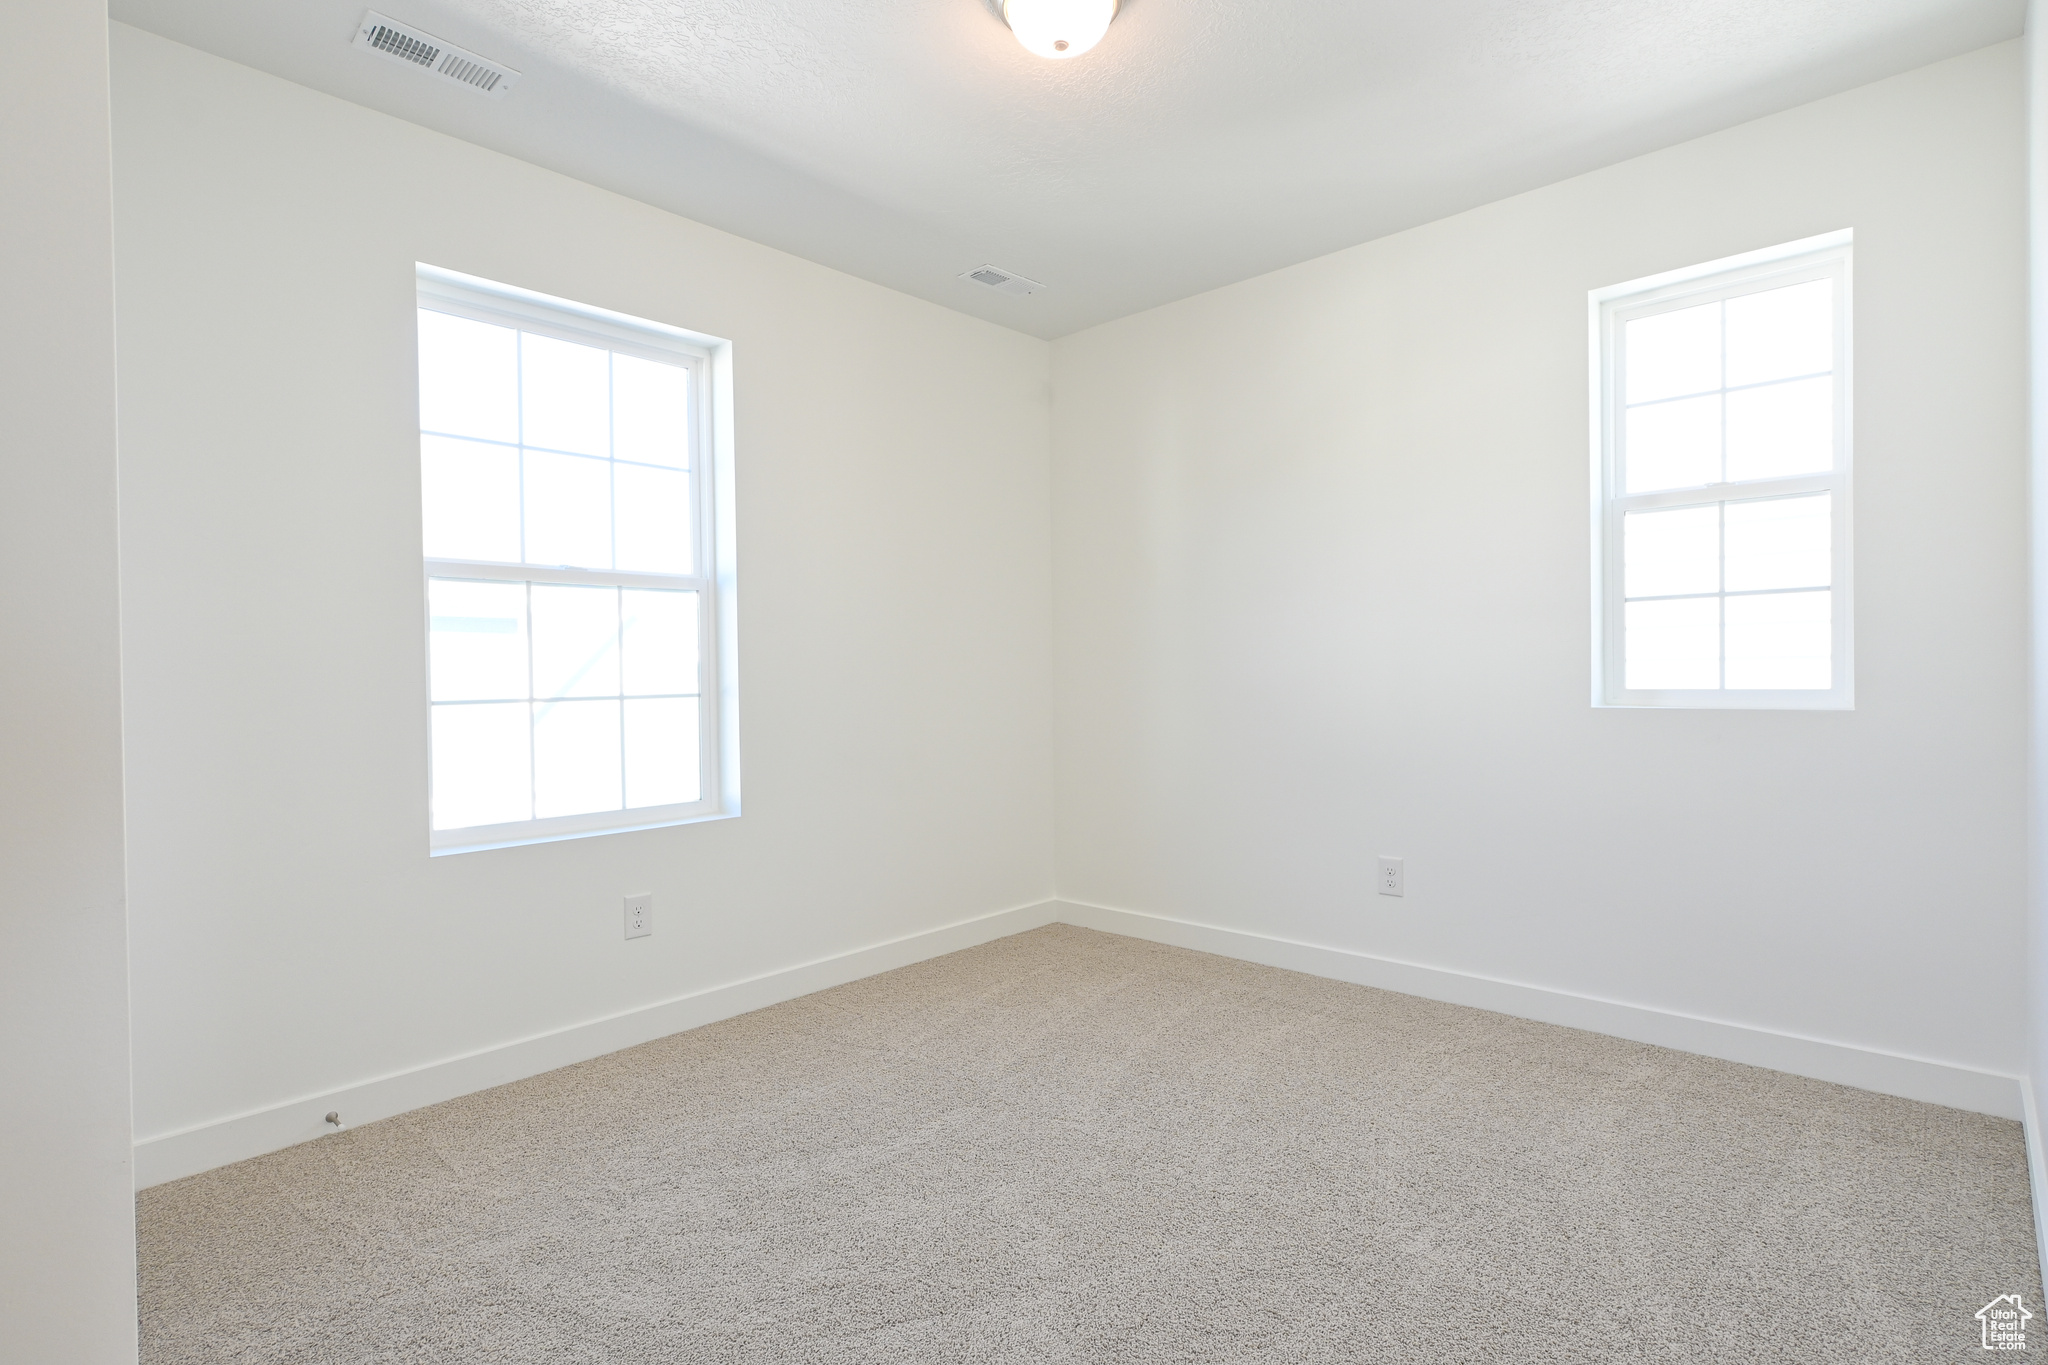 Empty room with light colored carpet and a wealth of natural light